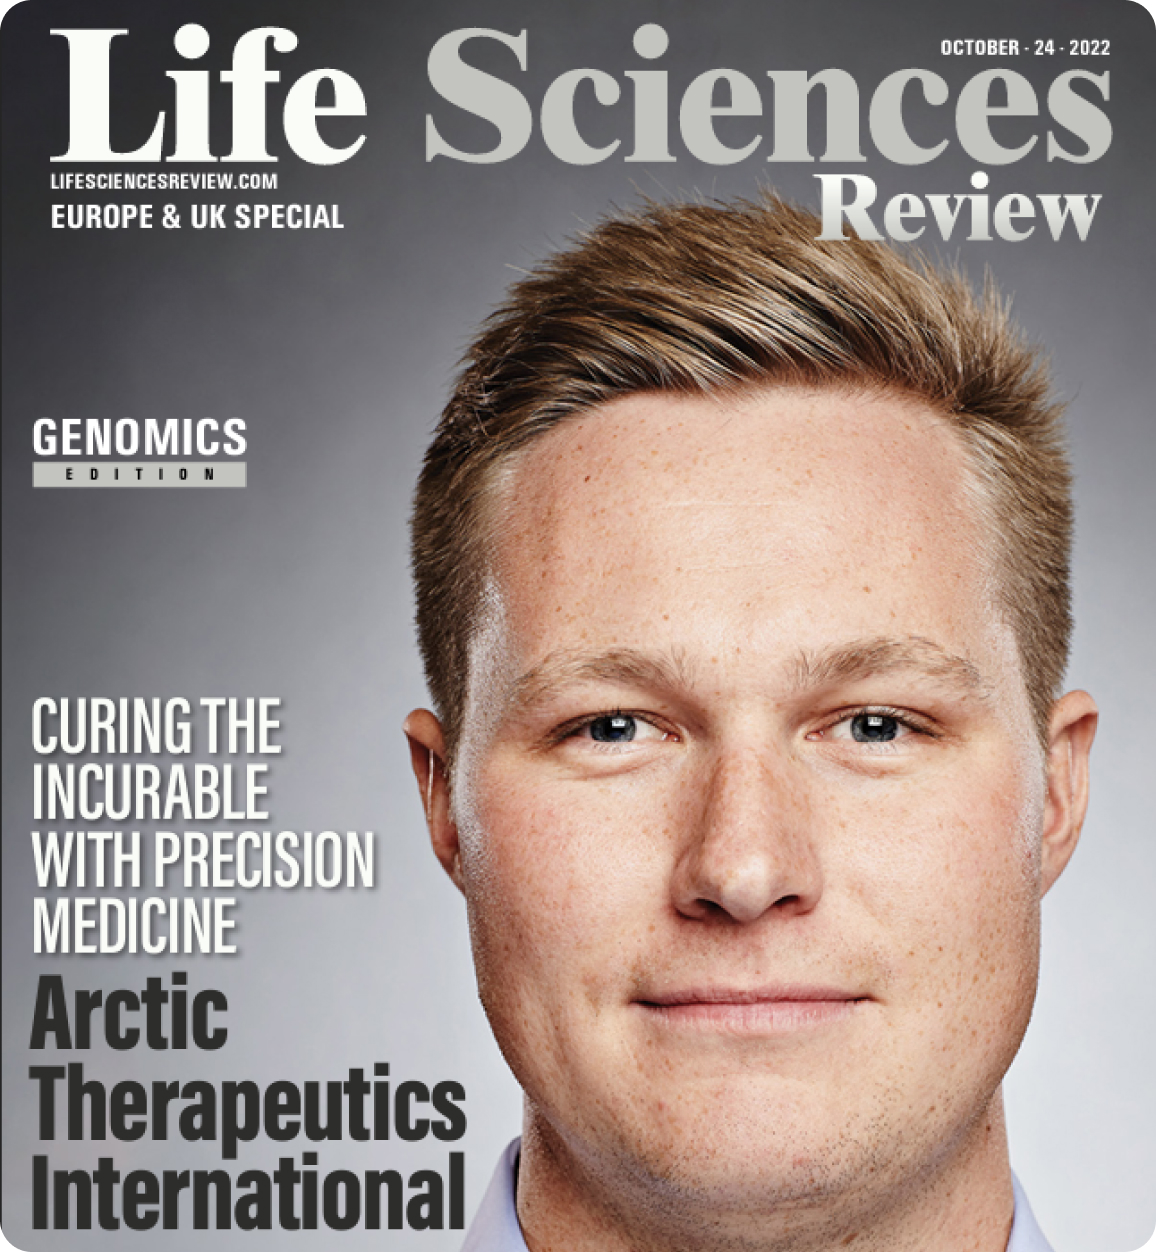 front page of the life science review magazine featuring Ívar Hákonarsson co founder of arctic therapeutics